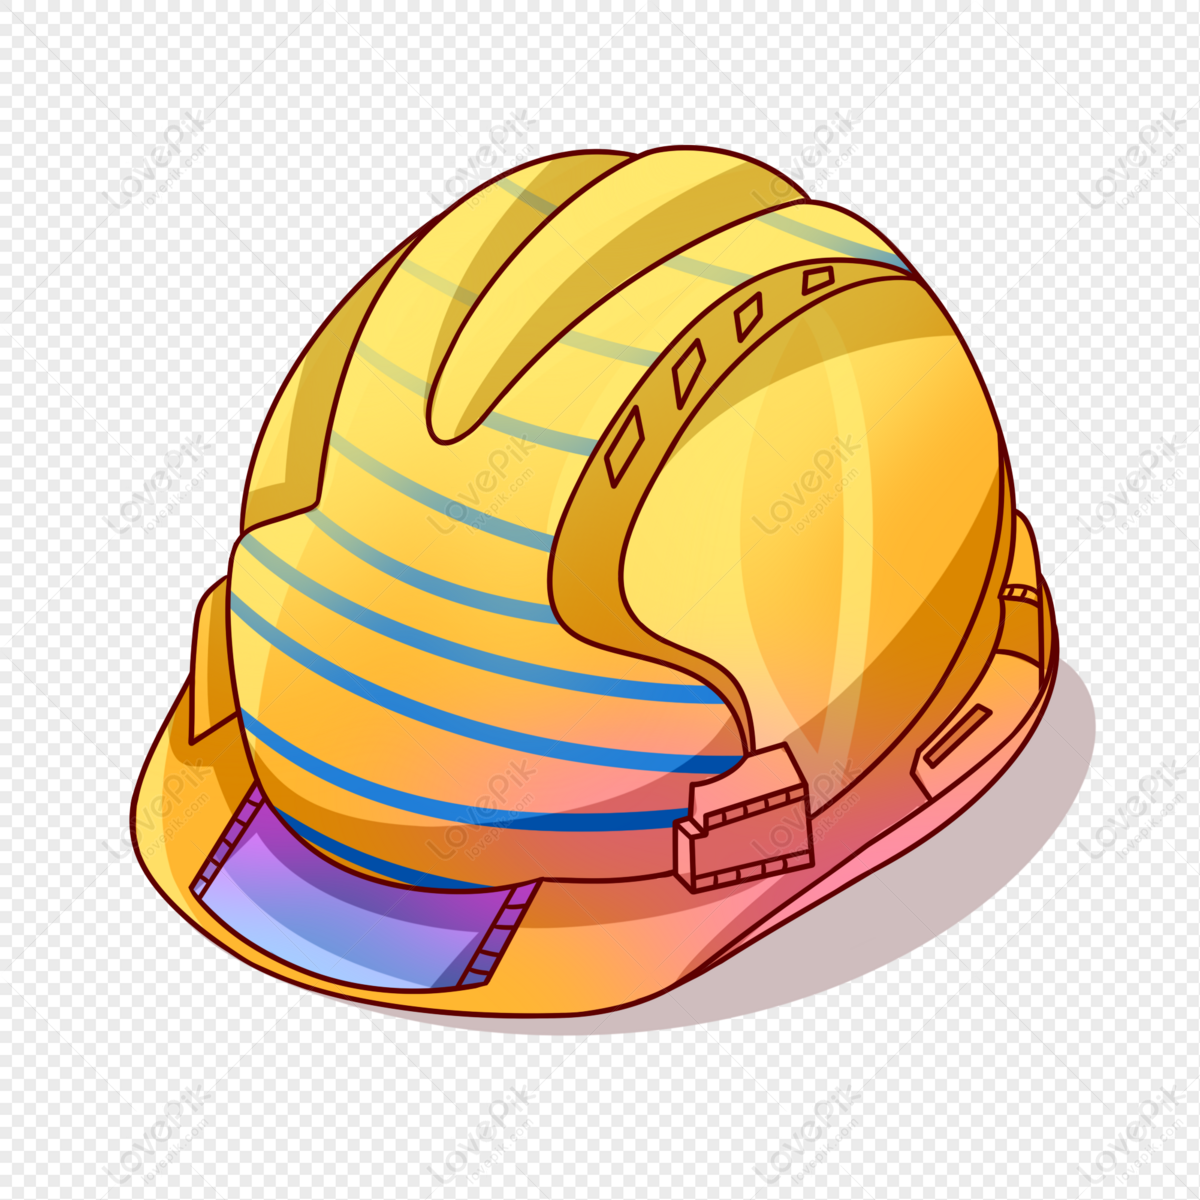 Cartoon Hard Hat PNG Image Free Download And Clipart Image For Free  Download - Lovepik | 401482811